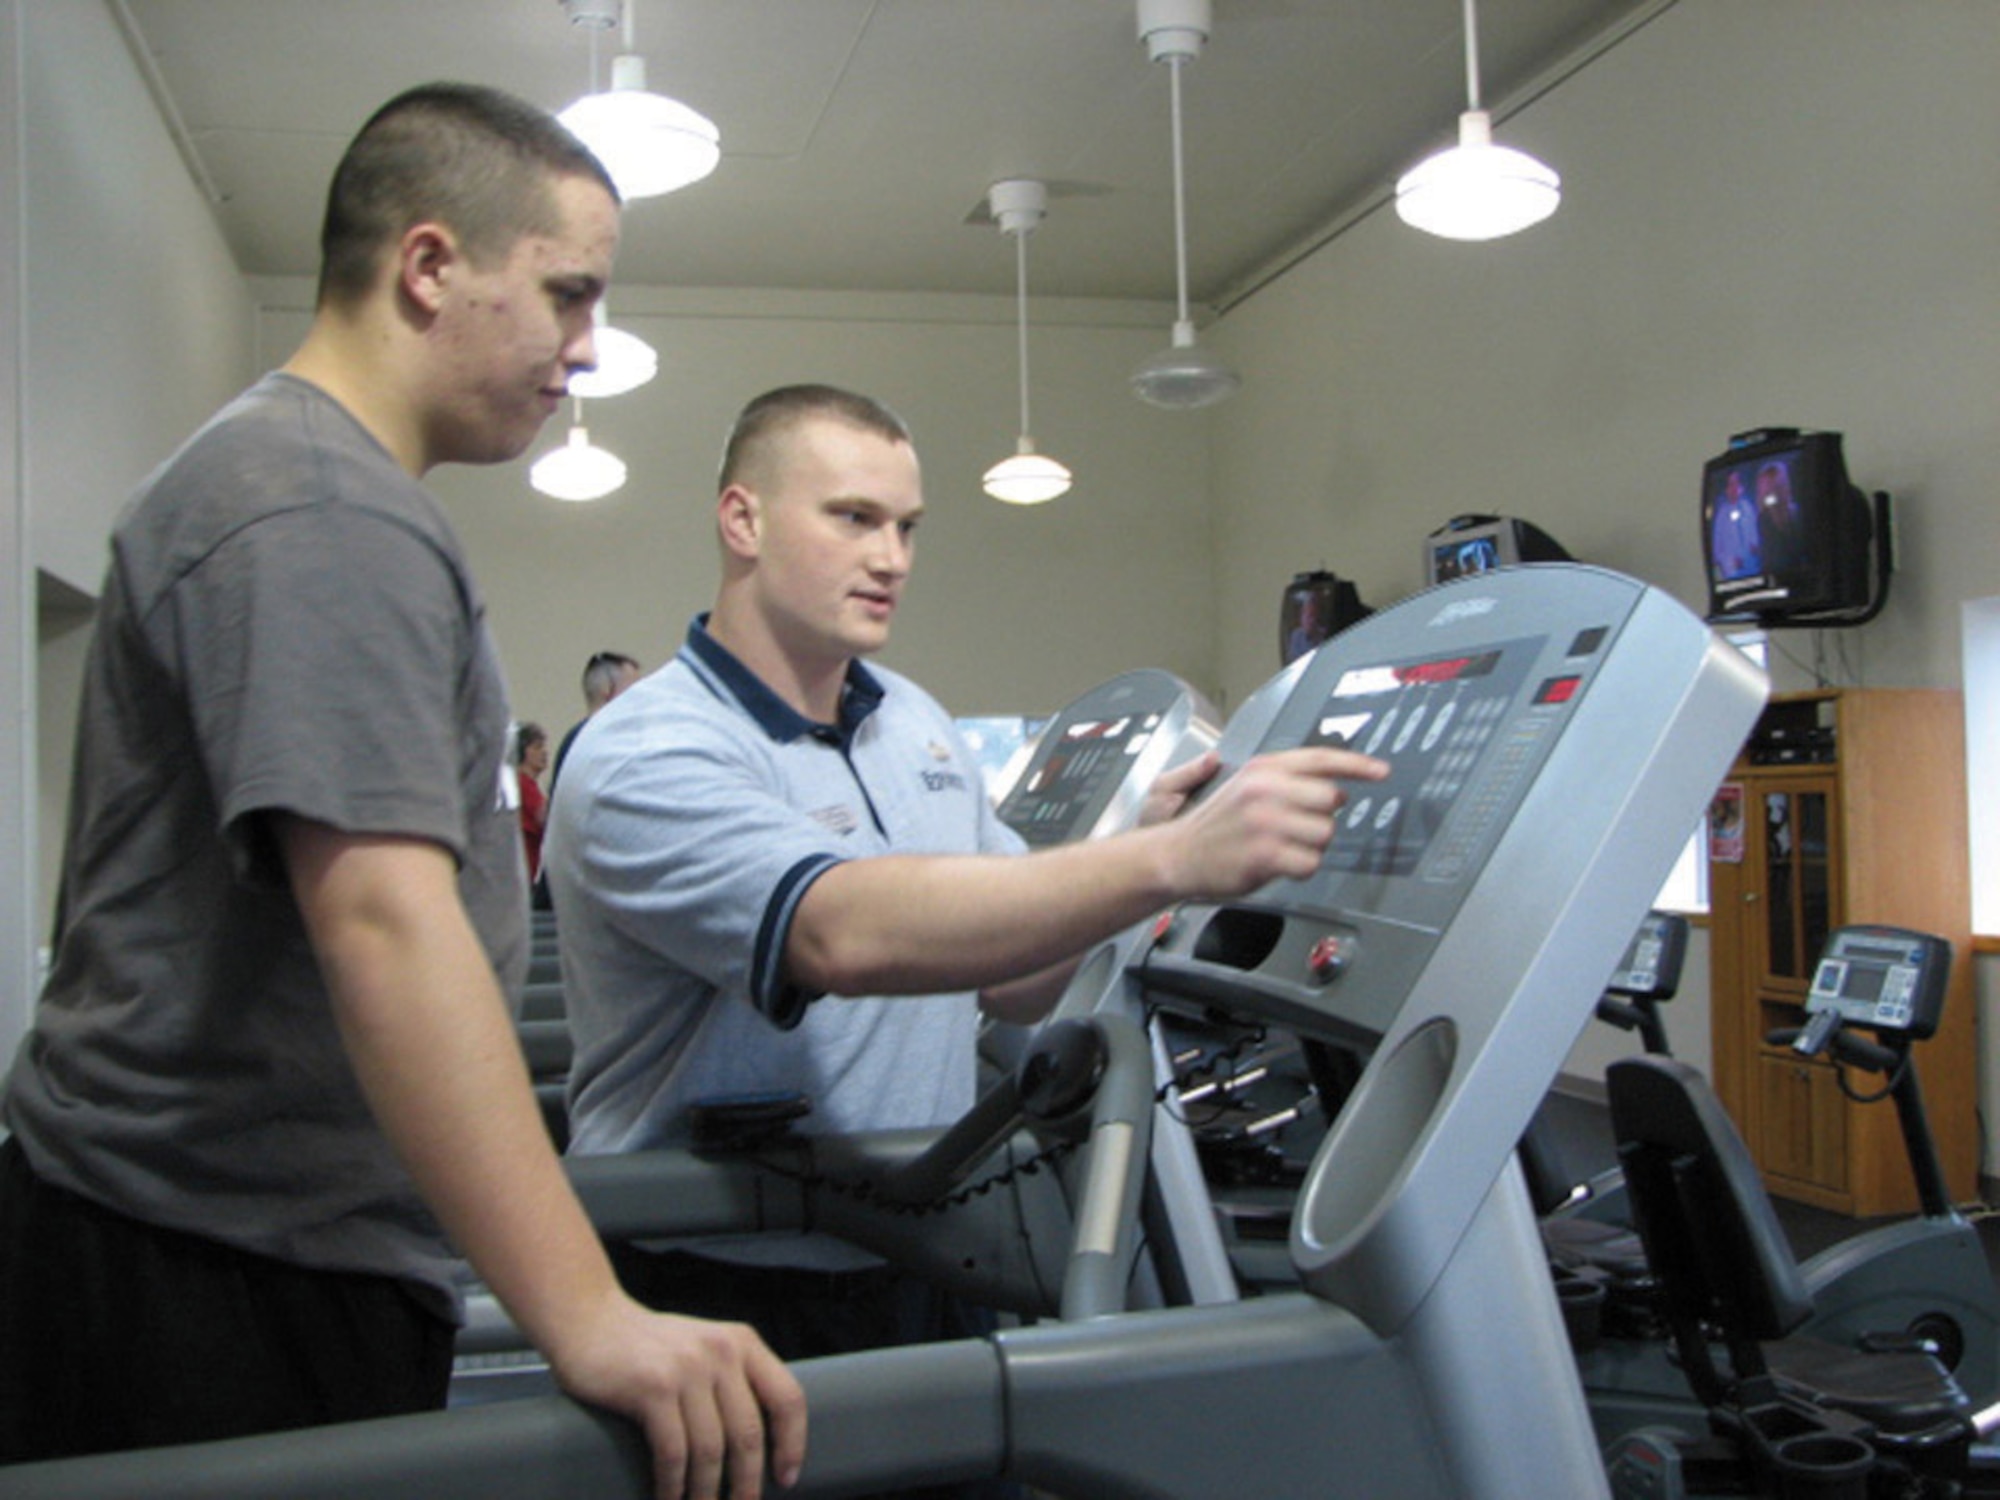 MCCHORD AIR FORCE BASE, Wash. -- Personal trainer Staff Sgt. Noah Grayson, 62nd Services Squadron, works with Airman 1st Class Travis Morrill, 62nd SVS, to select the appropriate settings on a treadmill so that Airman Morrill can get a good cardiovascular workout at the Fitness Center Annex recently.
(U.S. Air Force Photo/Staff Sgt. Tiffany Orr)